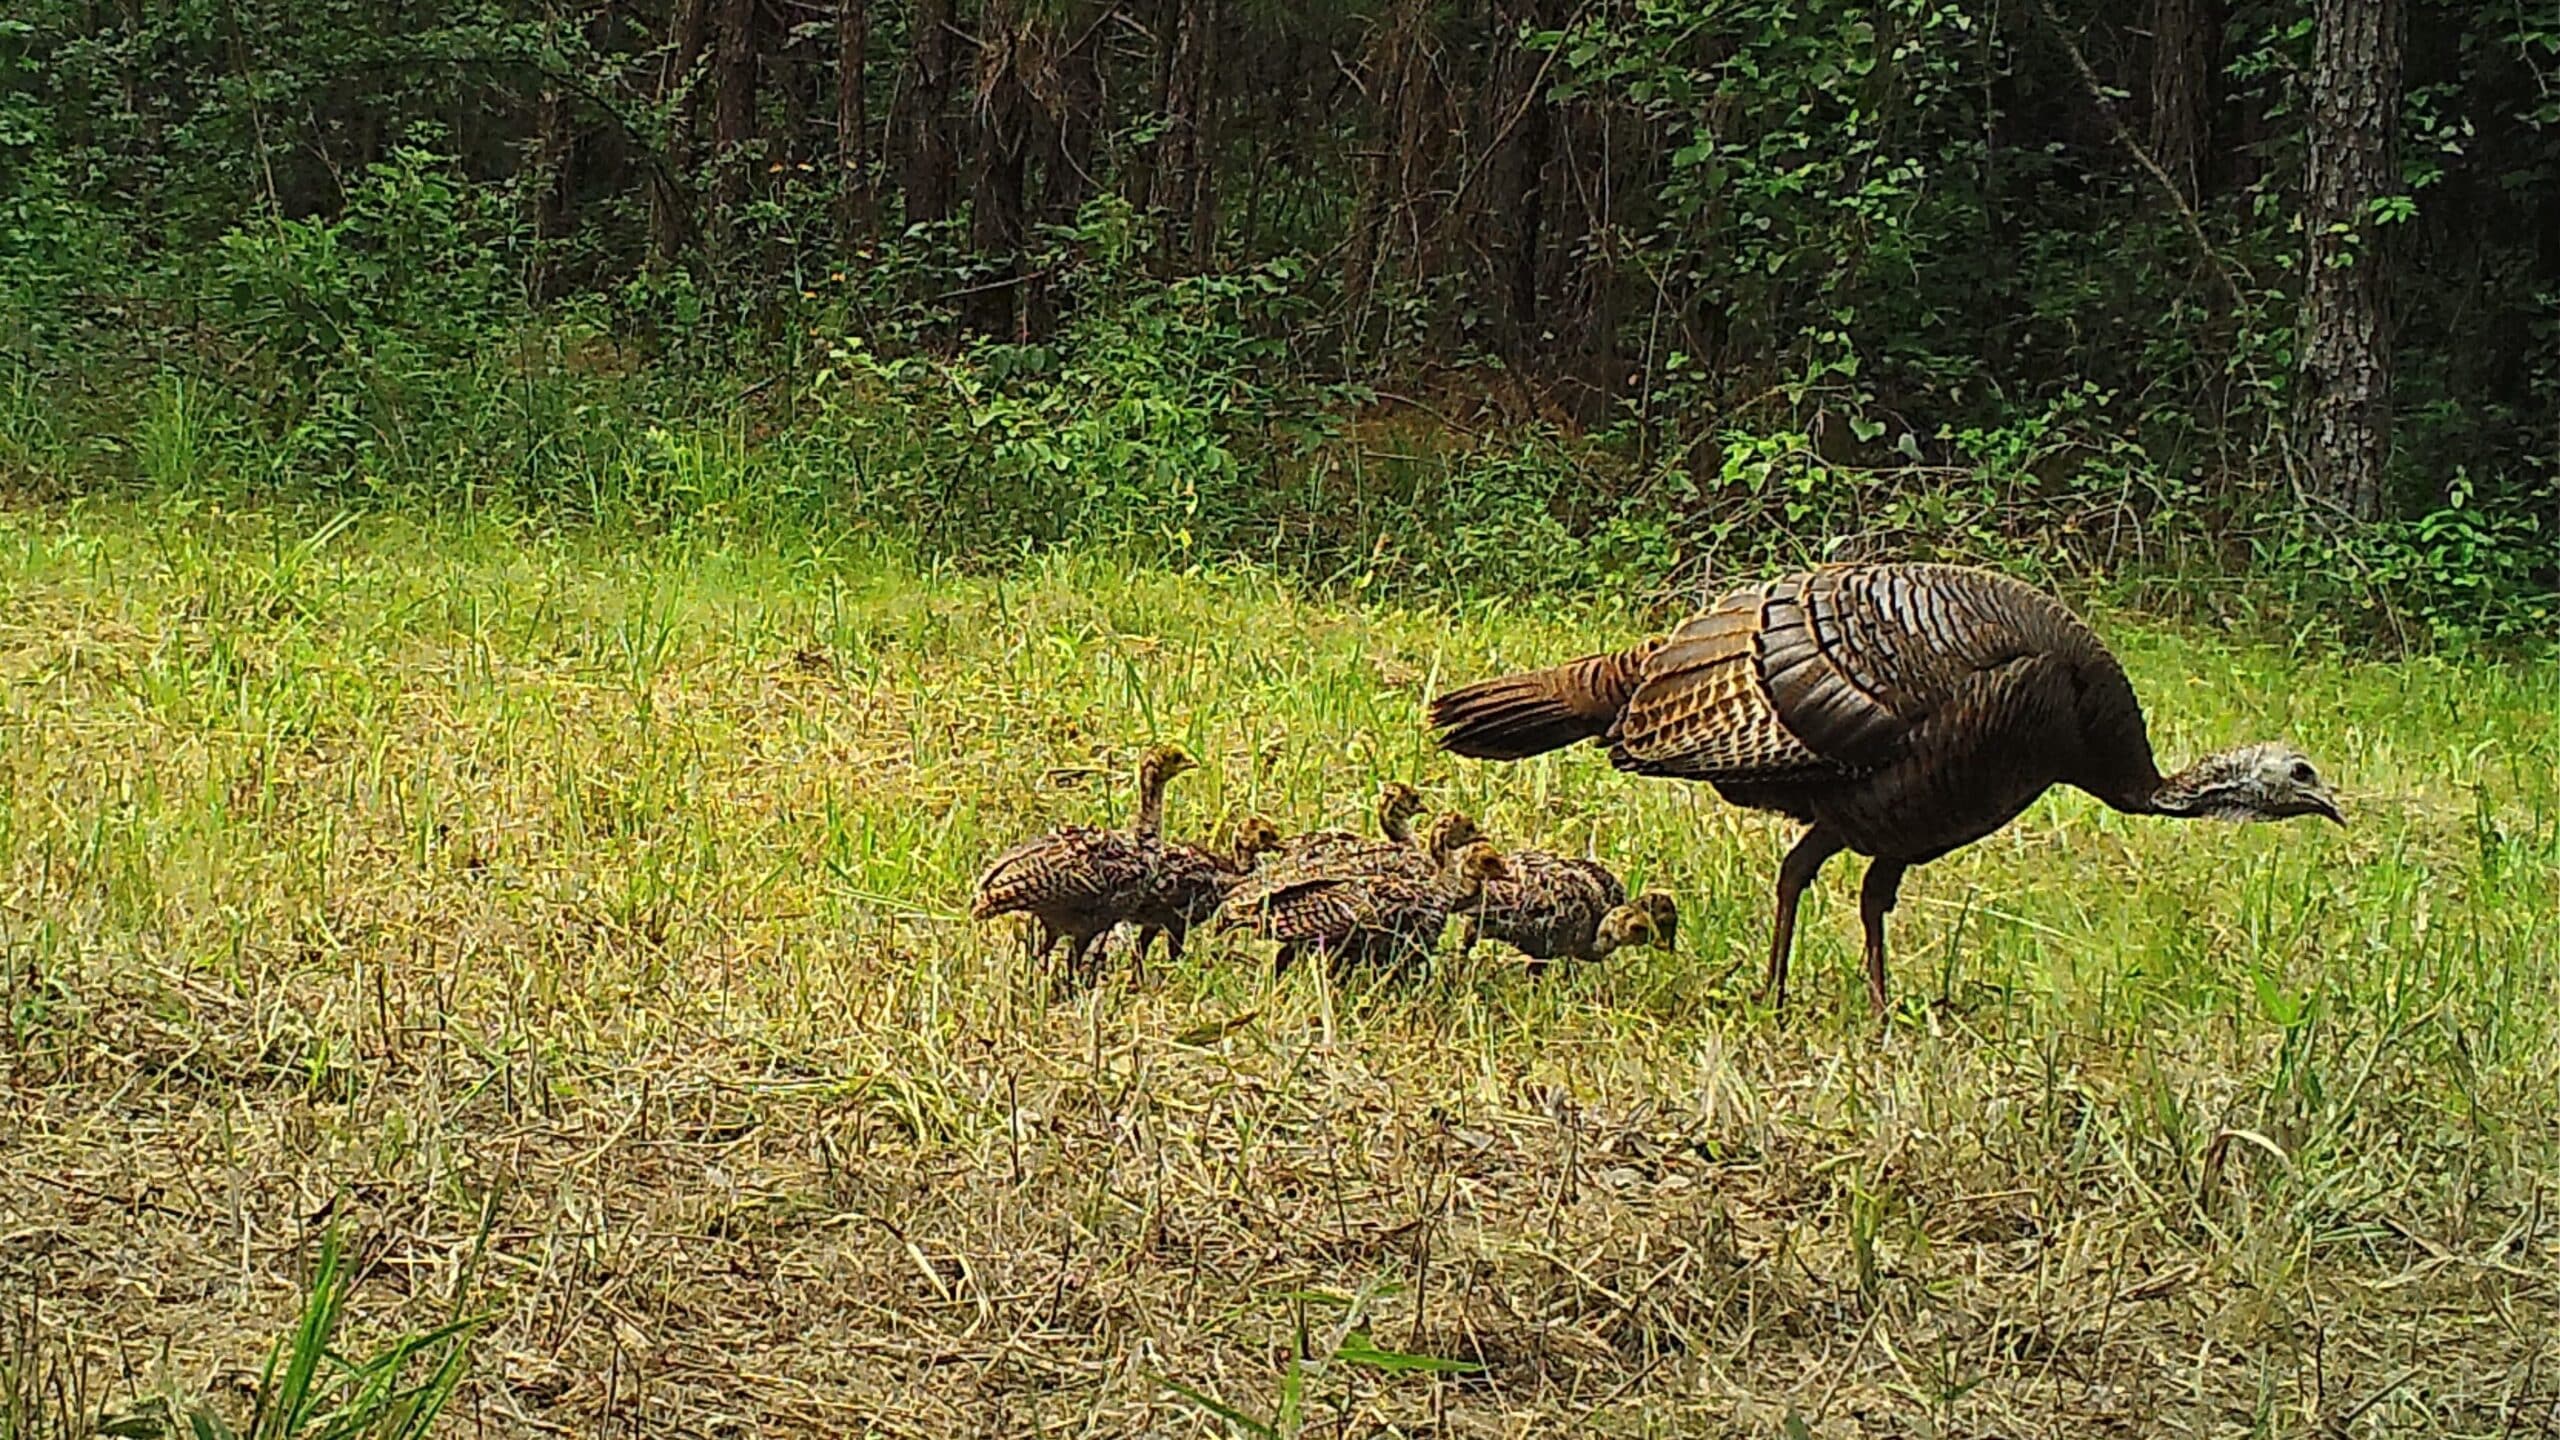 A turkey hen and her babies - Timing of Turkey Nesting May Not Shift With Changing Climate - Forestry and Environmental Resources at NC State University